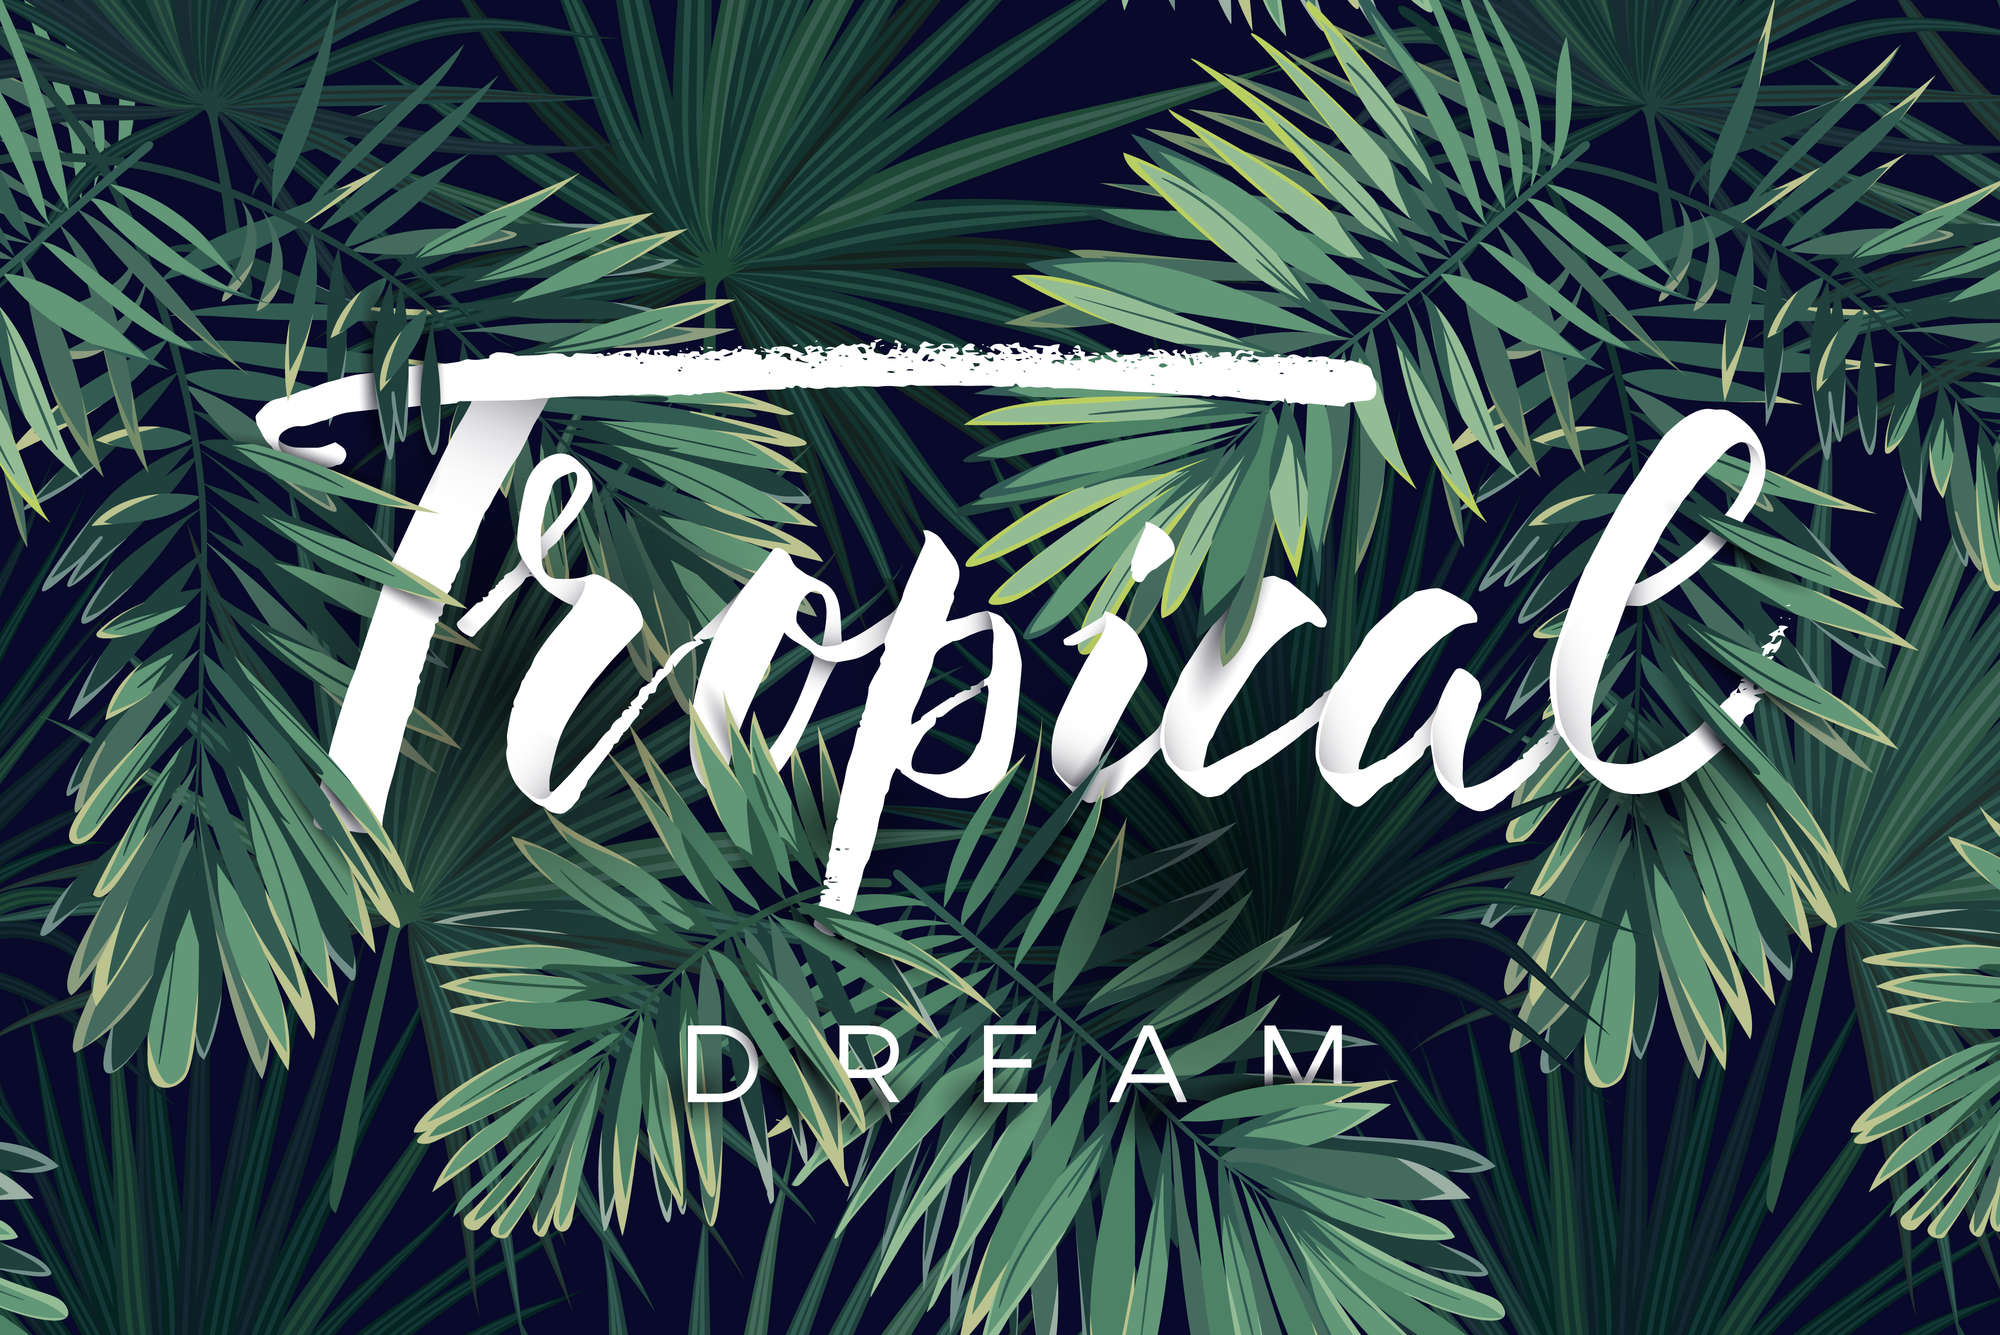             Graphic wall mural "Tropical Dream" lettering on matt smooth non-woven
        